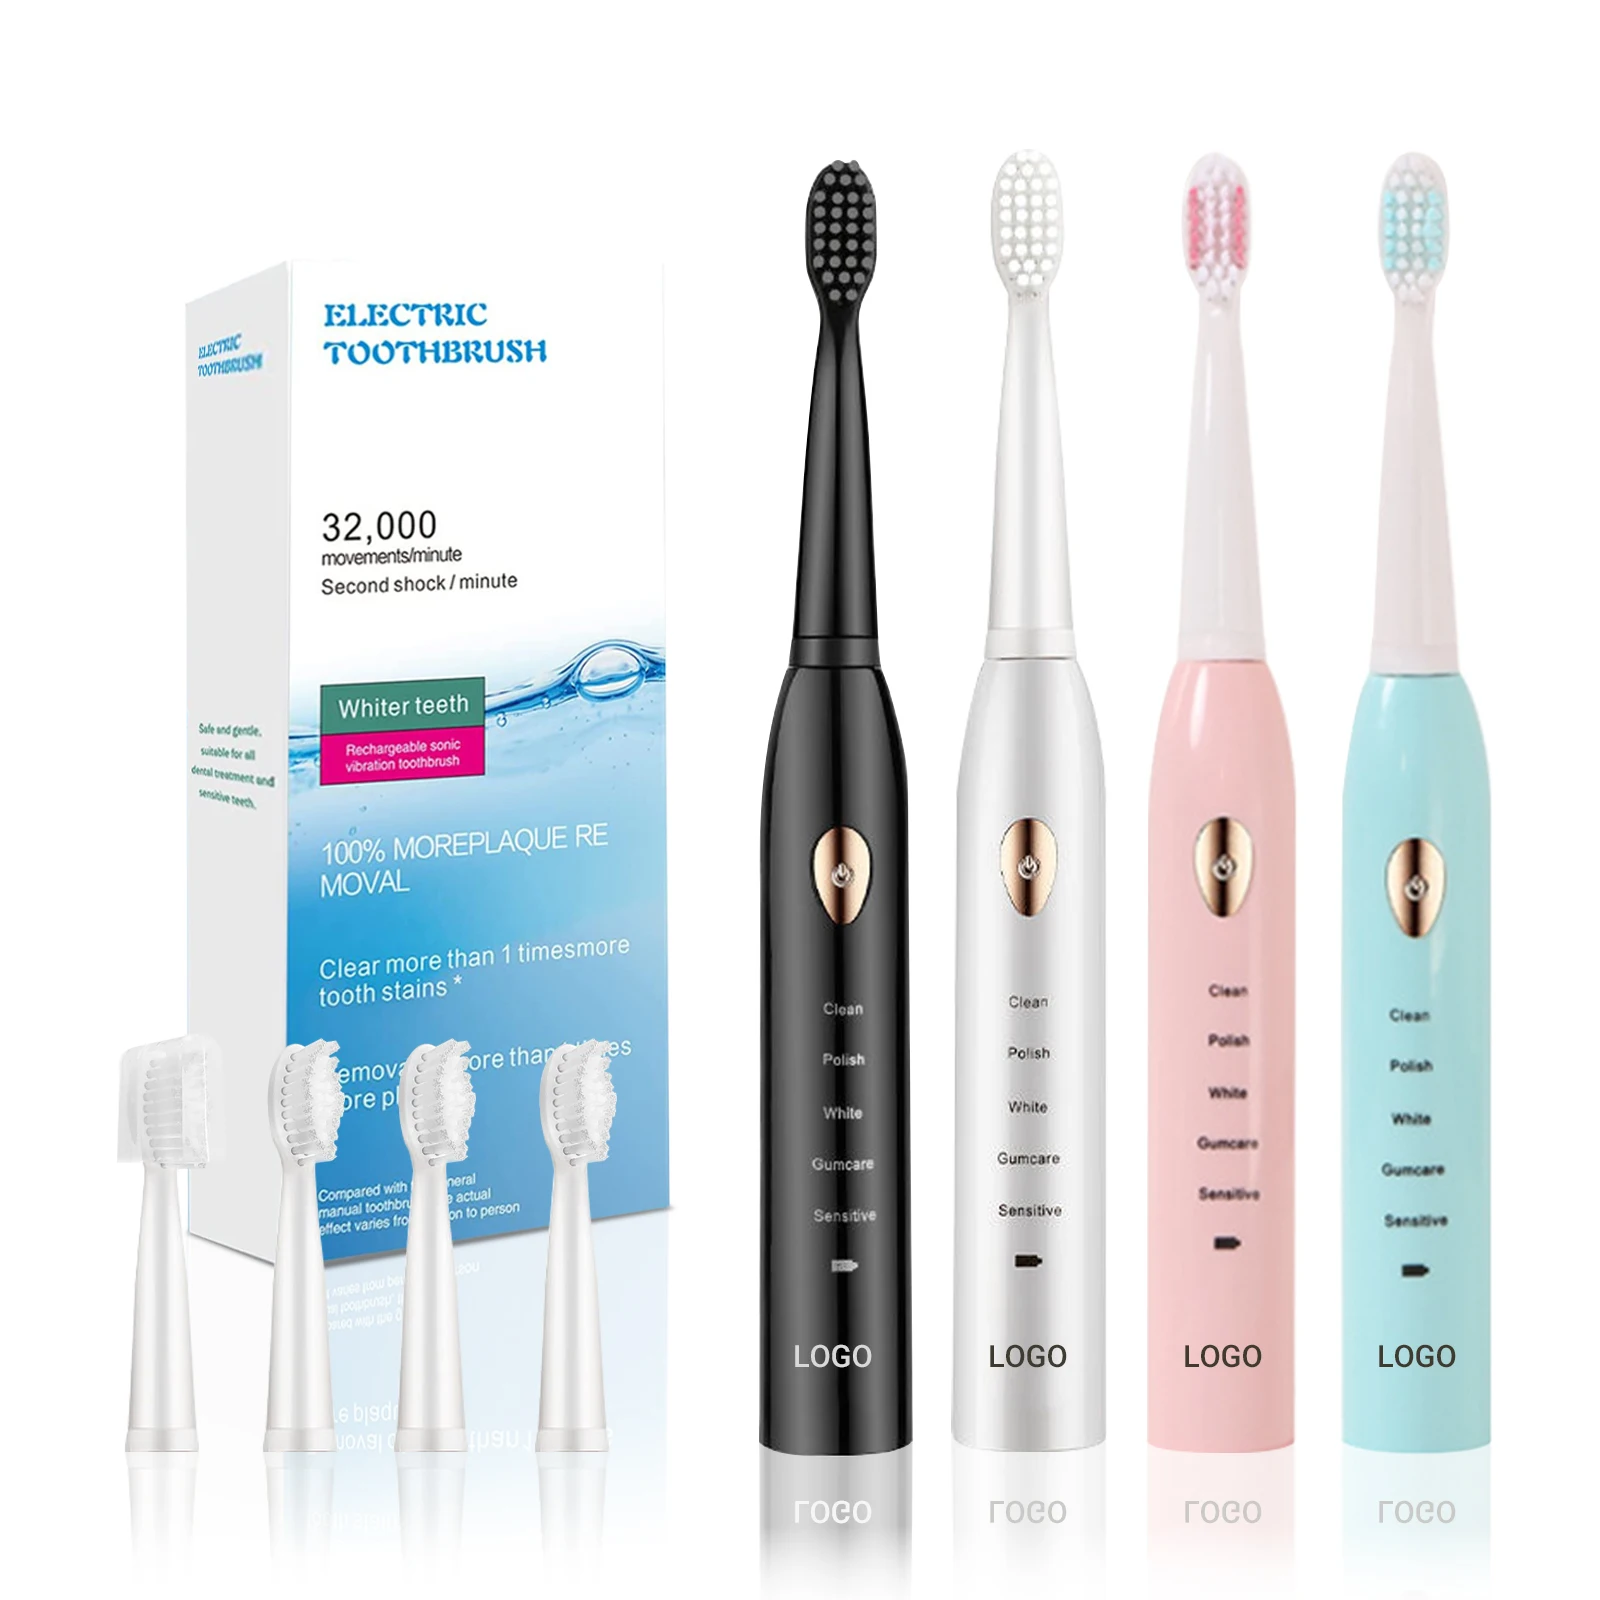 Wh-51 Wholesale Custom Smart Sonic Electric Toothbrush Oem Adult Oral Electric  Toothbrushes Manufacturer - Buy Custom Electric Toothbrush,Electric  Toothbrush Oem,Sonic Electric Toothbrush Product on Alibaba.com